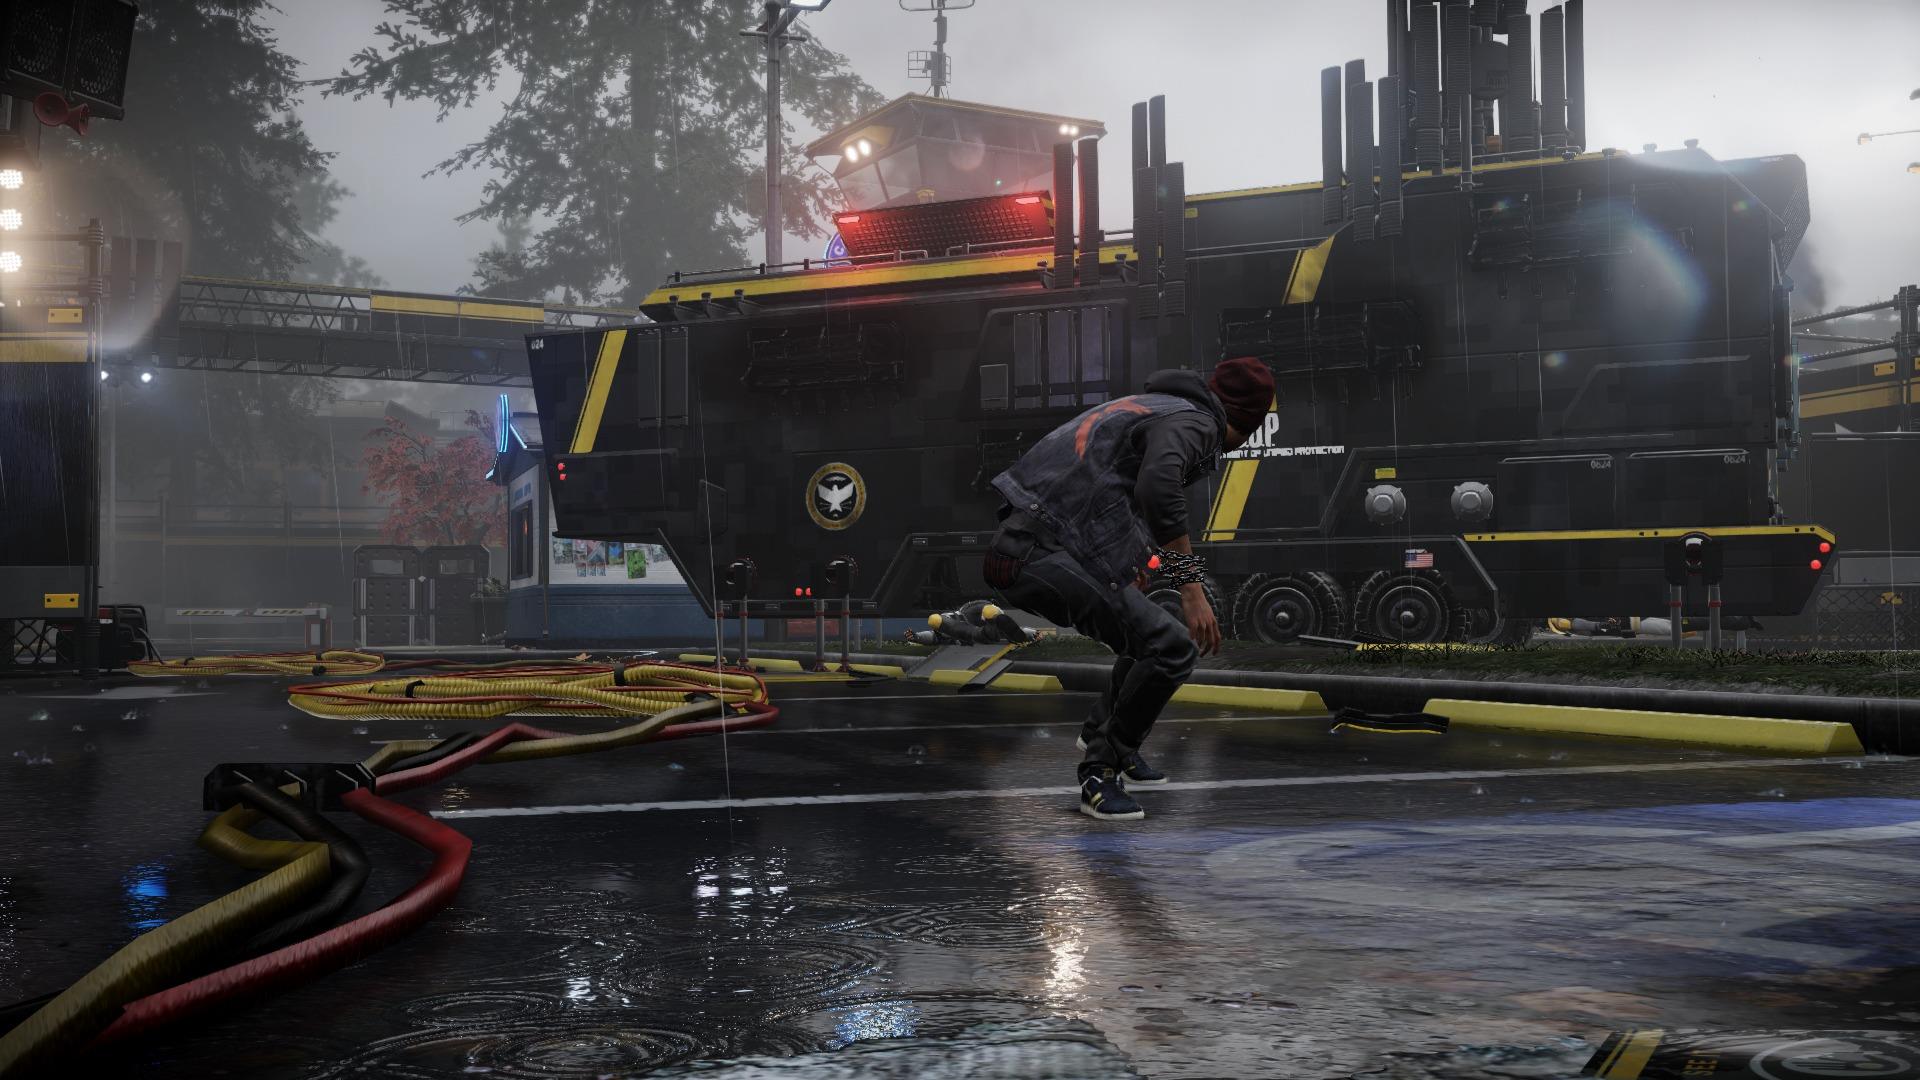 infamous second son gameplay 1080p torrent